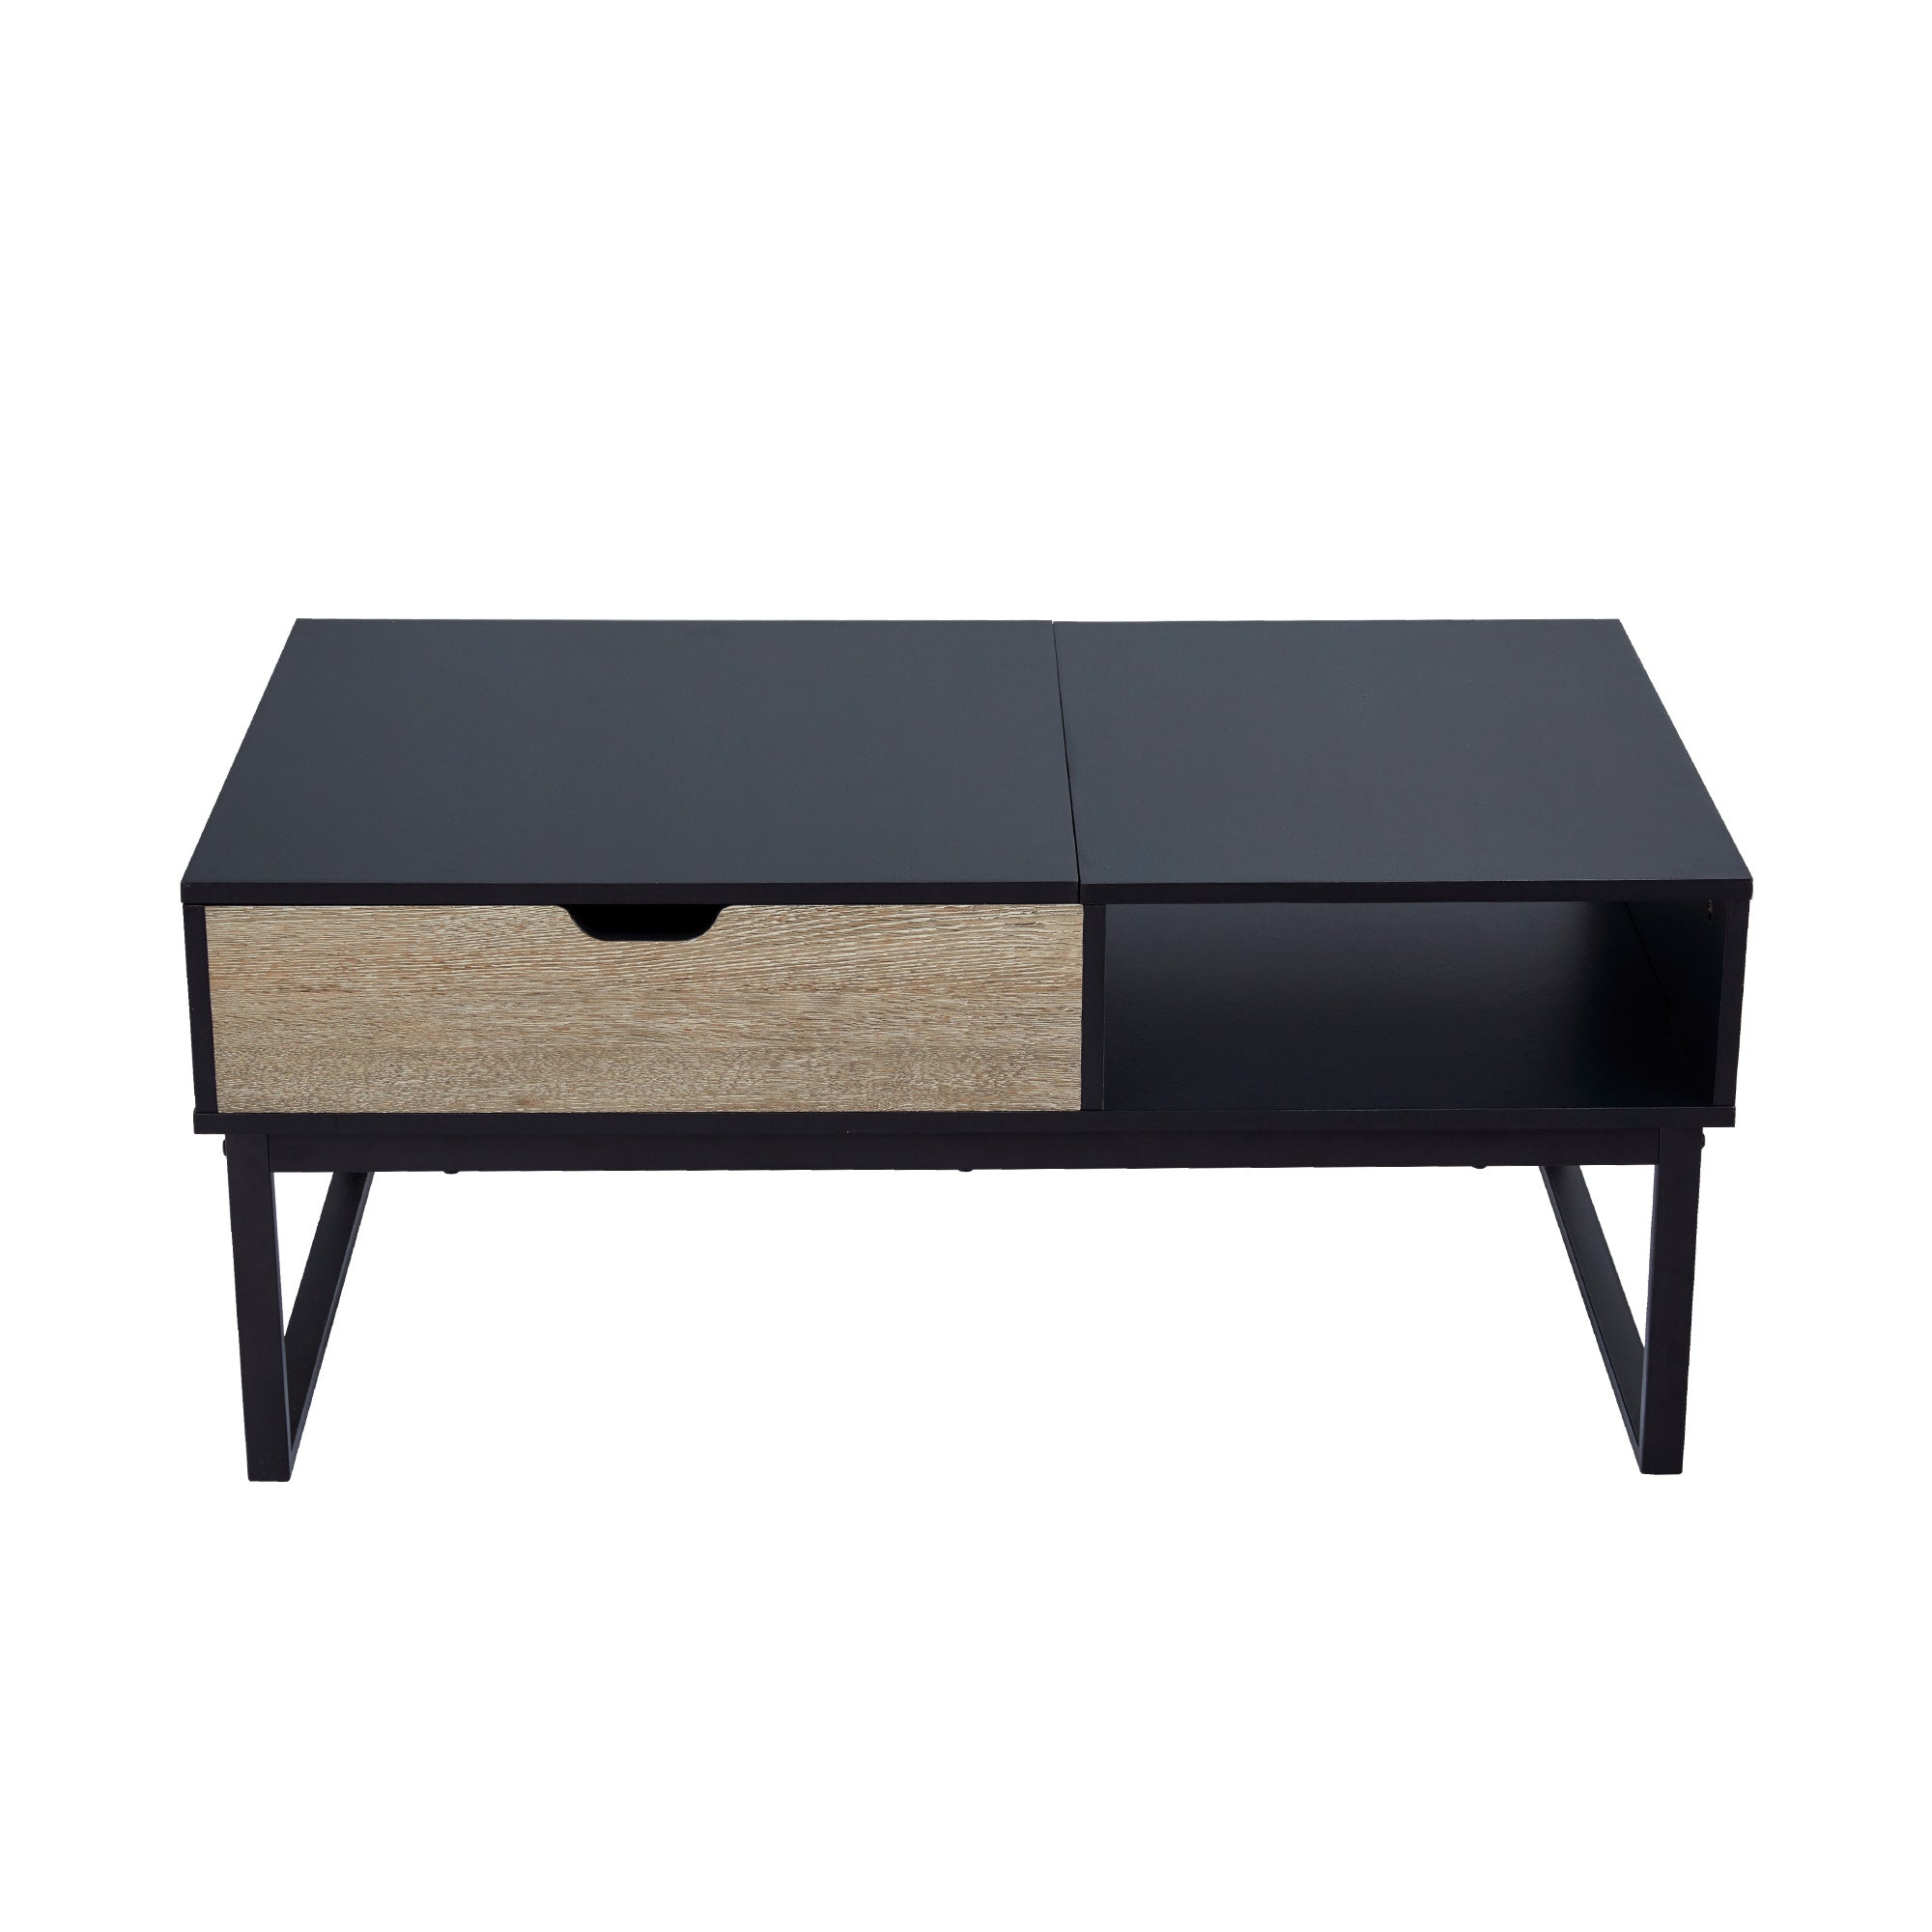 Teamson Home - Lift Top Coffee Table with Storage and Metal Legs